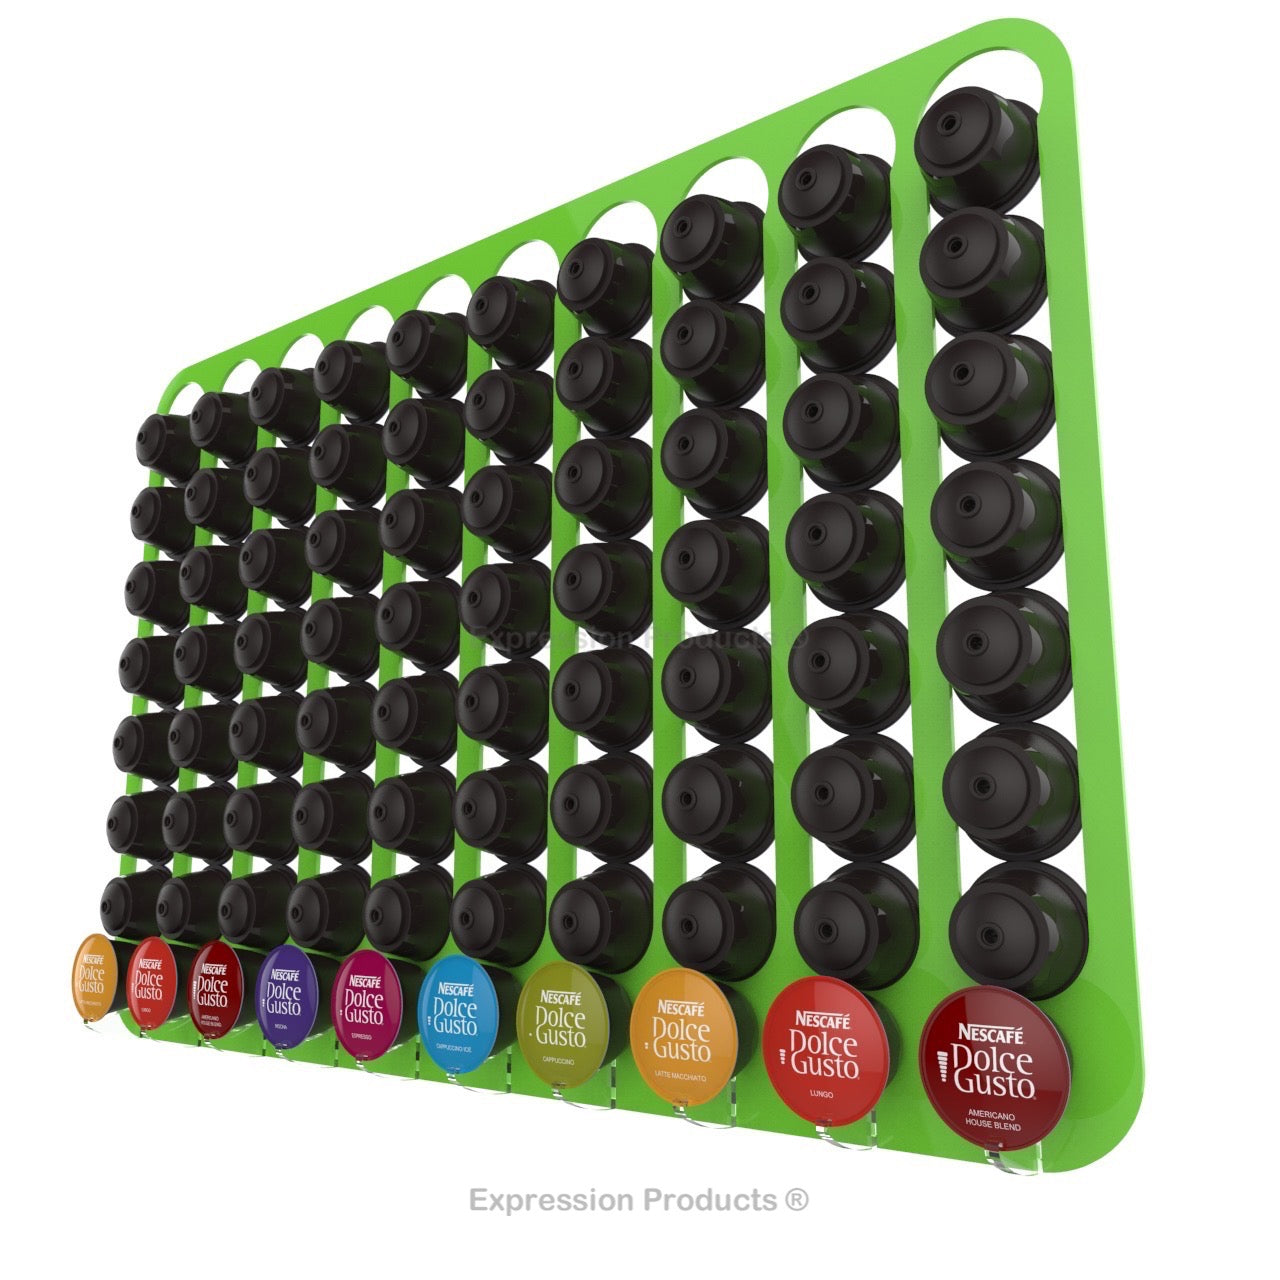 Dolce Gusto Coffee Pod Holder, Wall Mounted.  Shown in Lime Holding 80 Pods